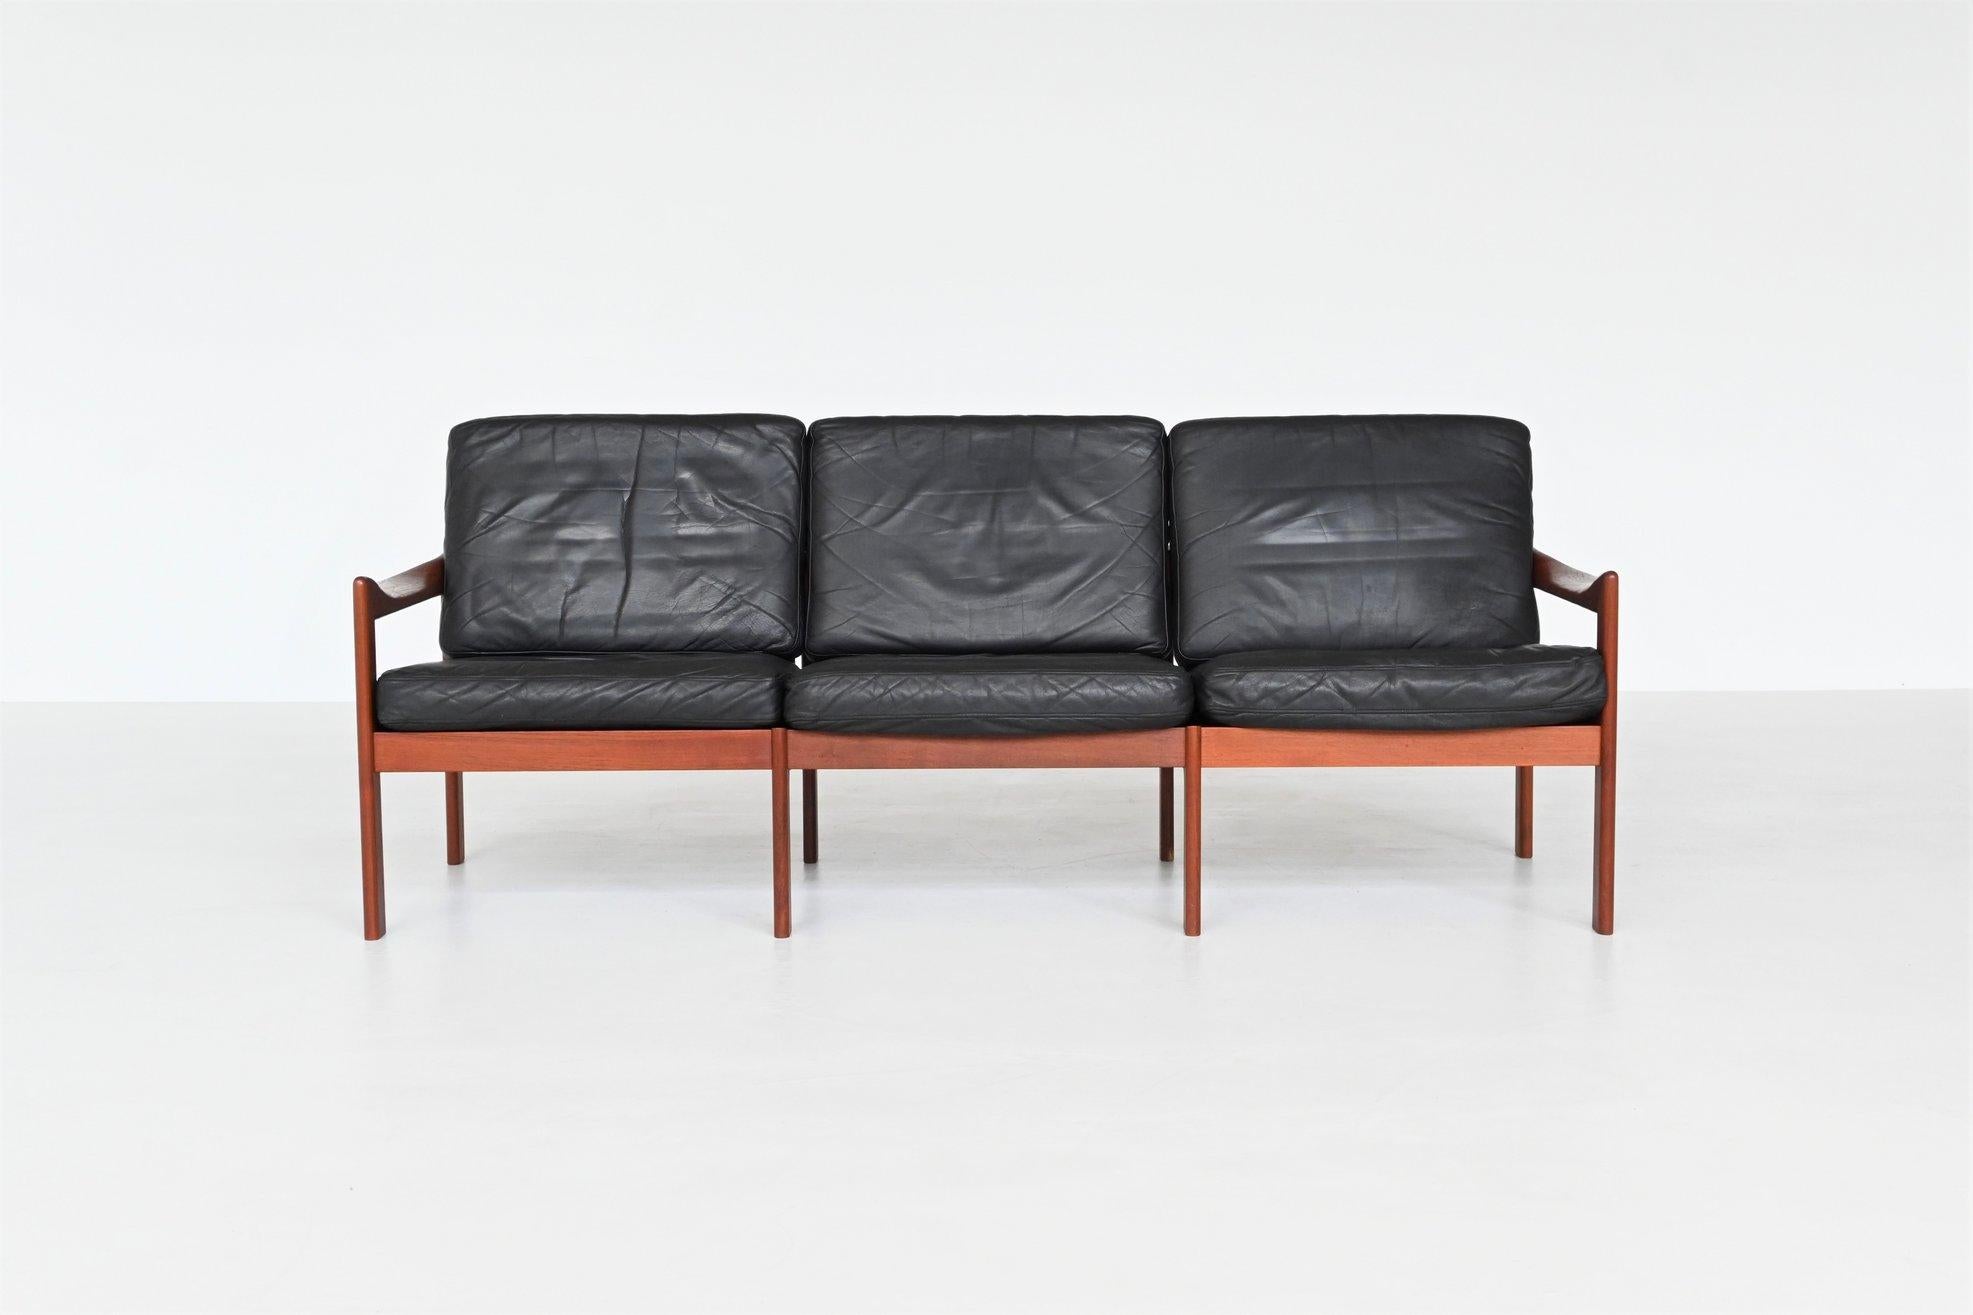 Beautiful elegant shaped three-seat sofa designed by Illum Wikkelsø and manufactured by Niels Eilersen, 1962. This sculpted sofa features a solid teak wooden frame and the cushions are upholstered with original black leather. Some beautiful details